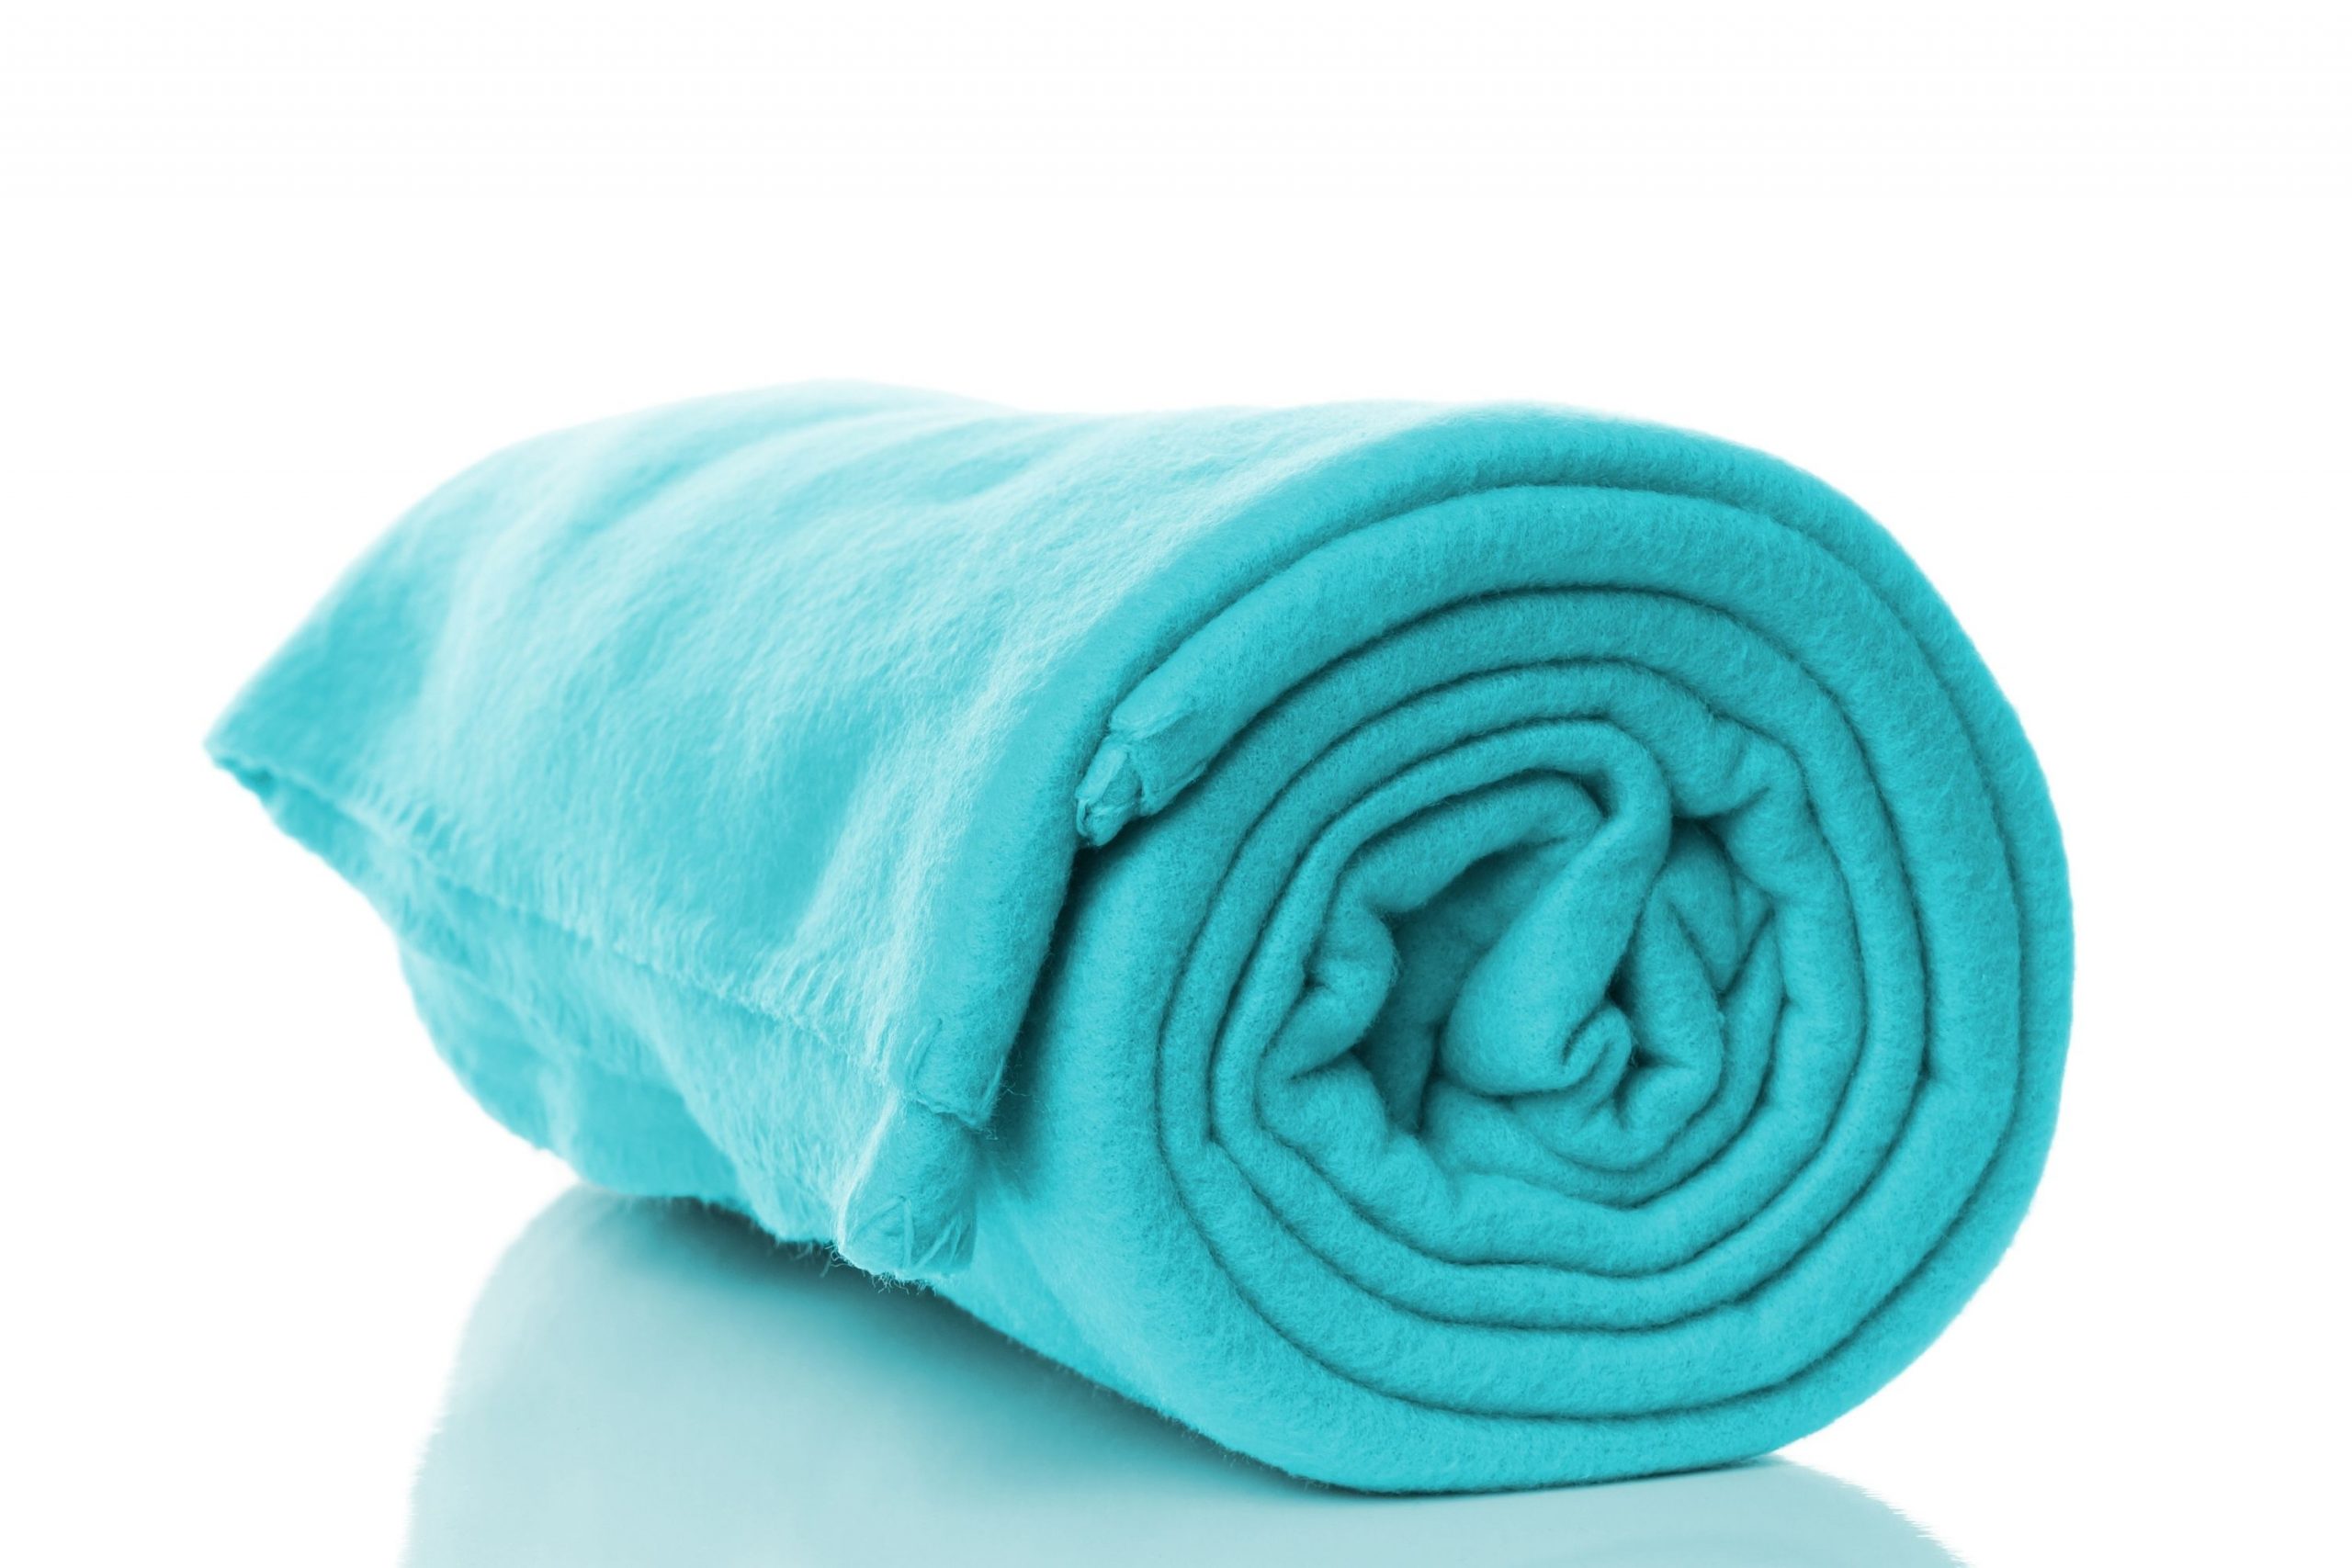 How to Wash a Fleece Blanket Without Ruining It